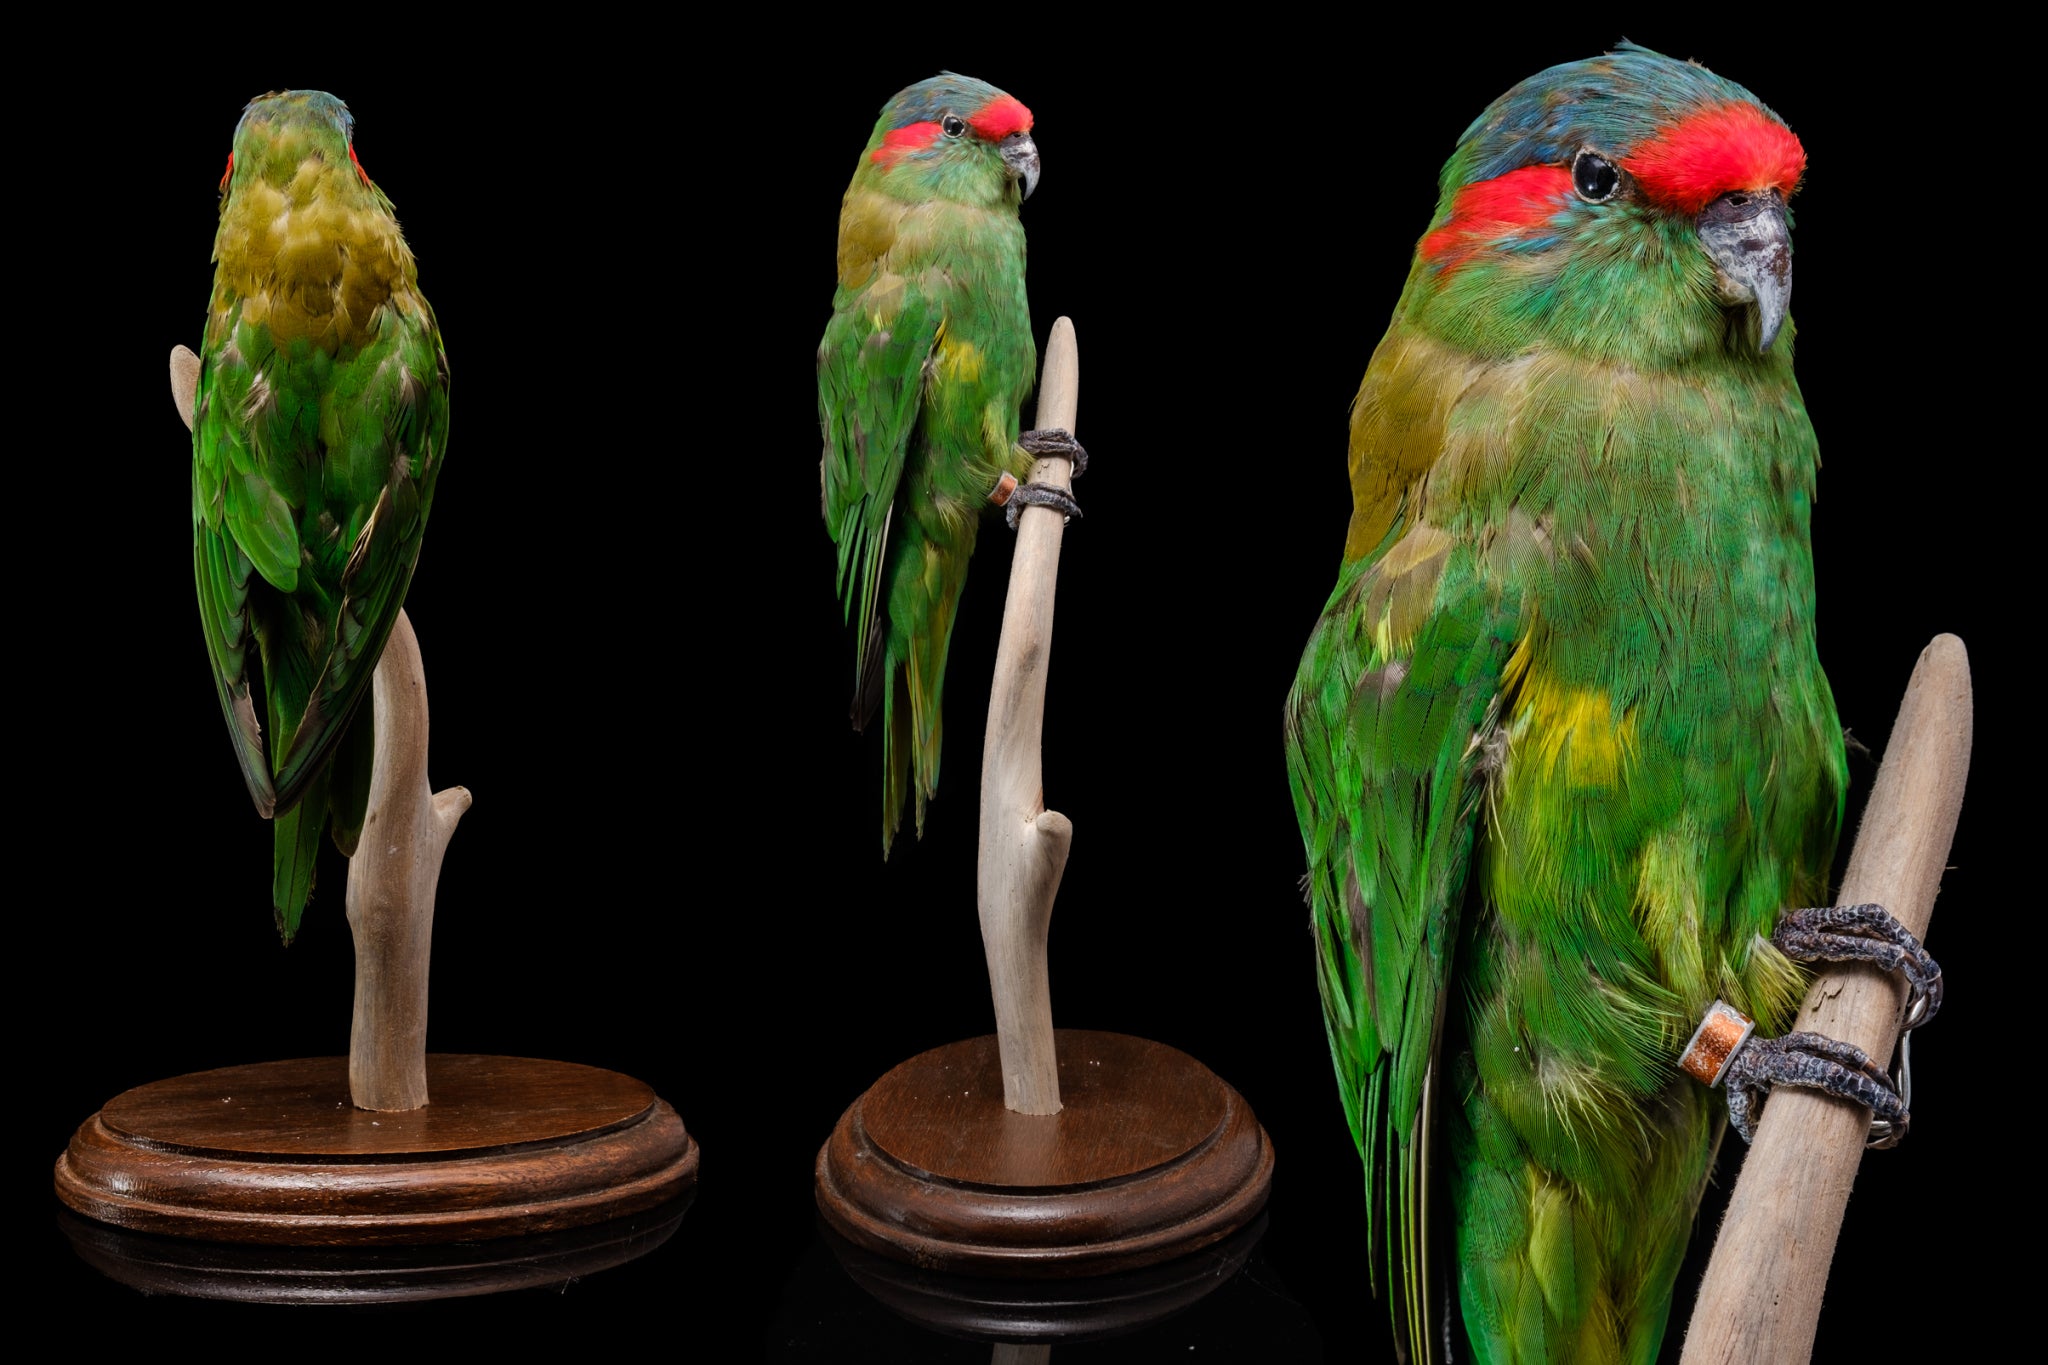 Vintage Mounted Taxidermied Parakeet.